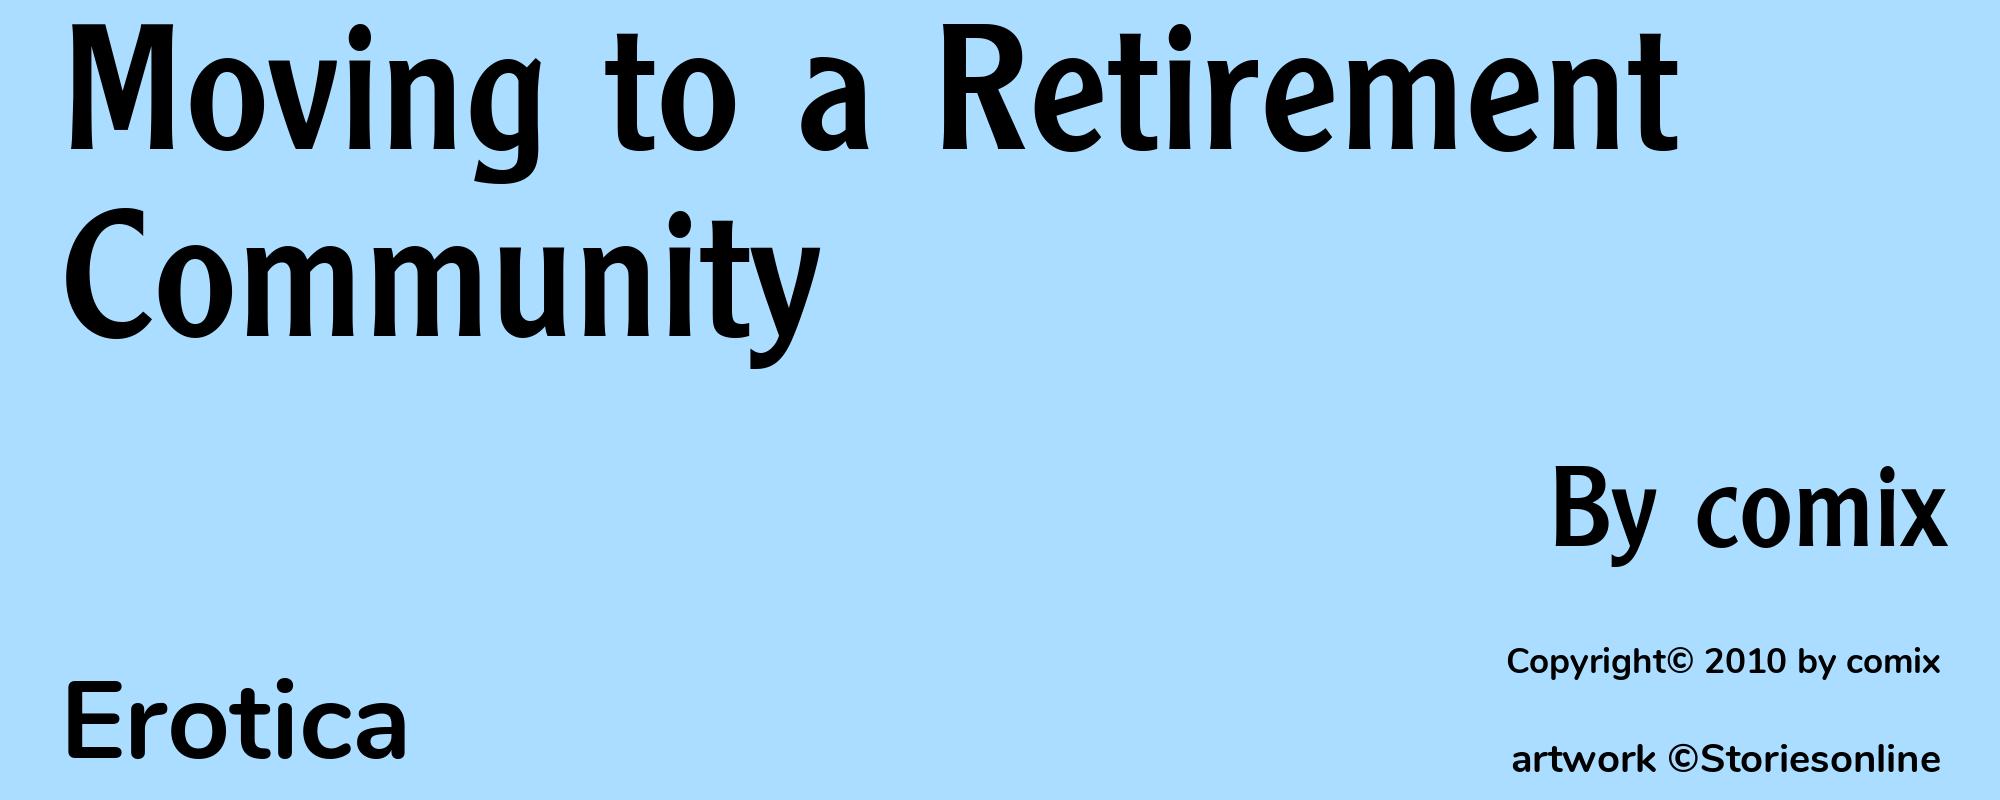 Moving to a Retirement Community - Cover